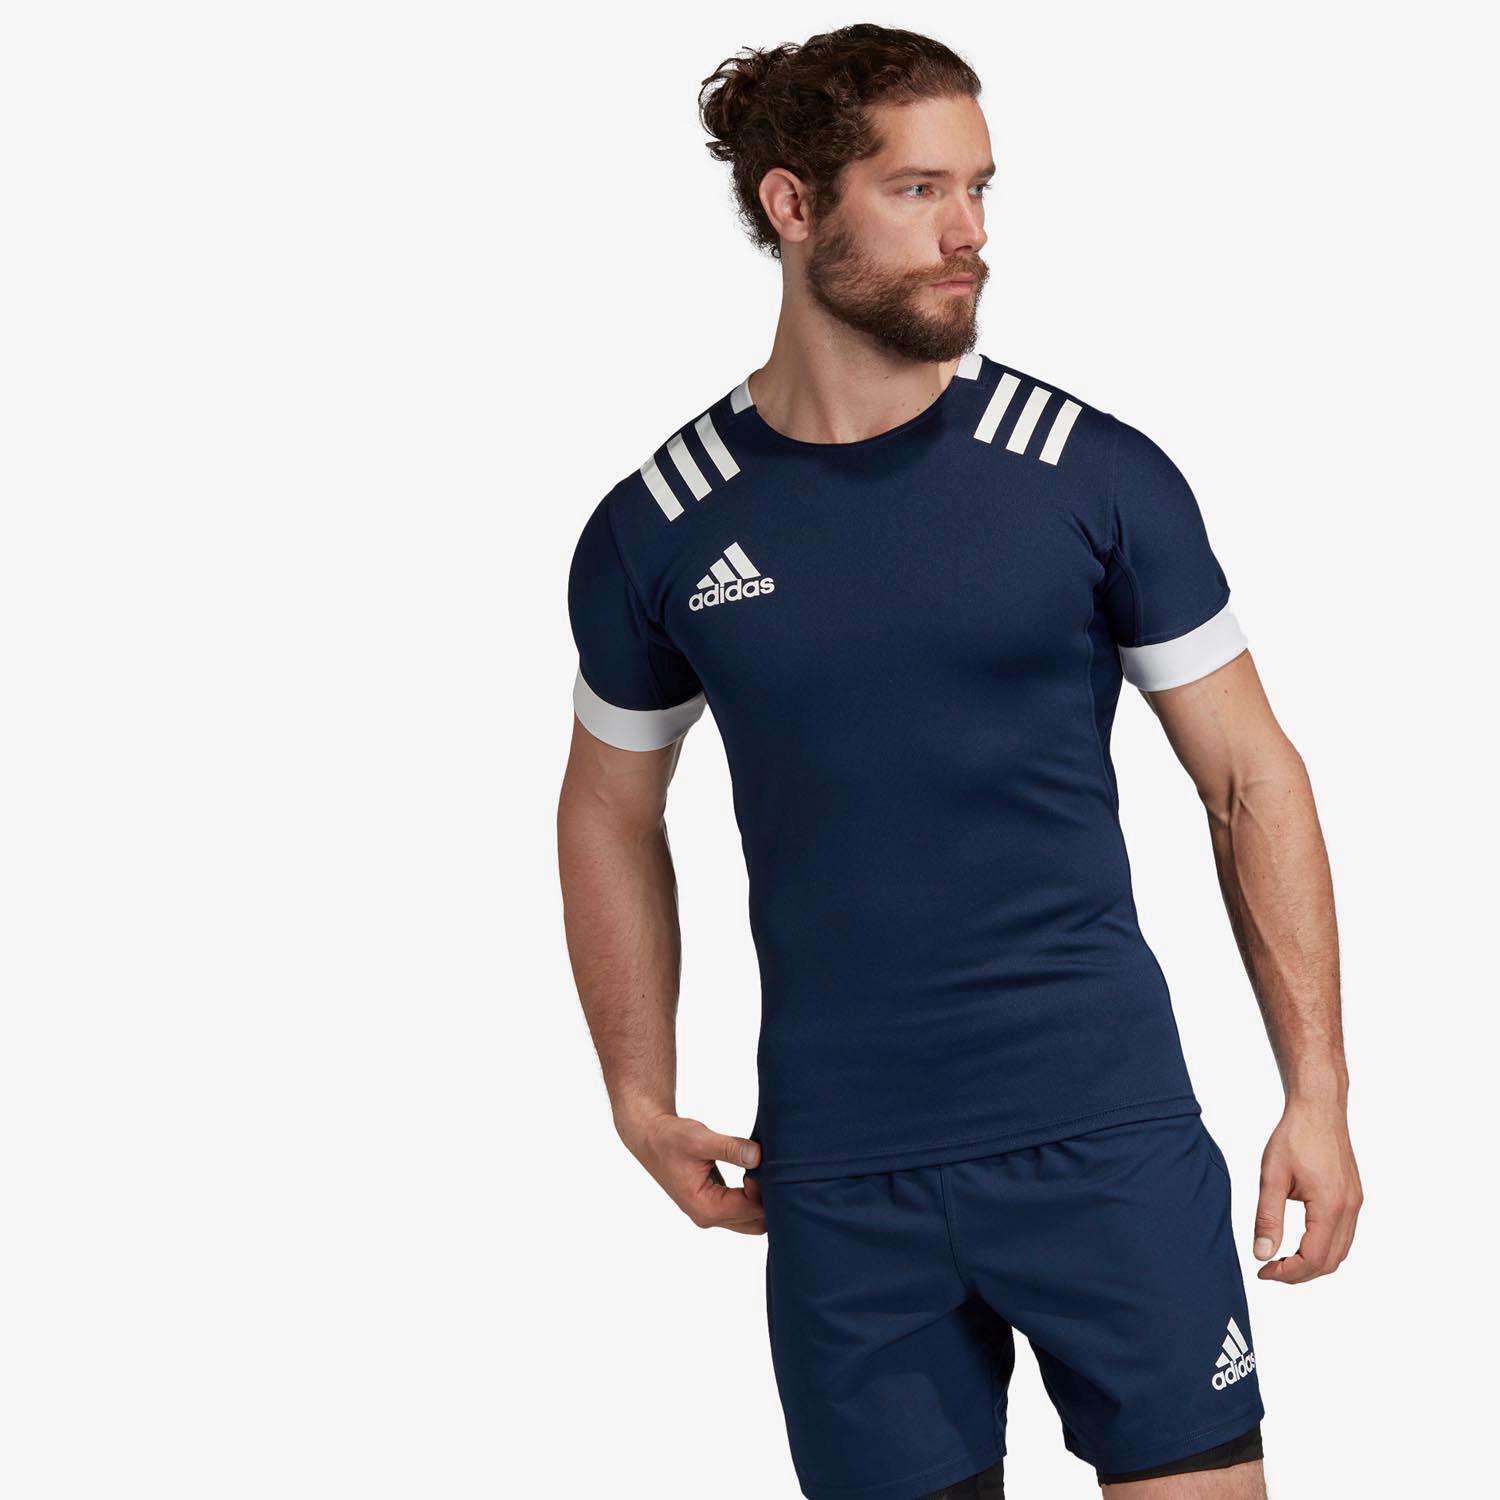 adidas 3 Stripes - Bleu marine - T-shirt Rugby Homme sports taille S